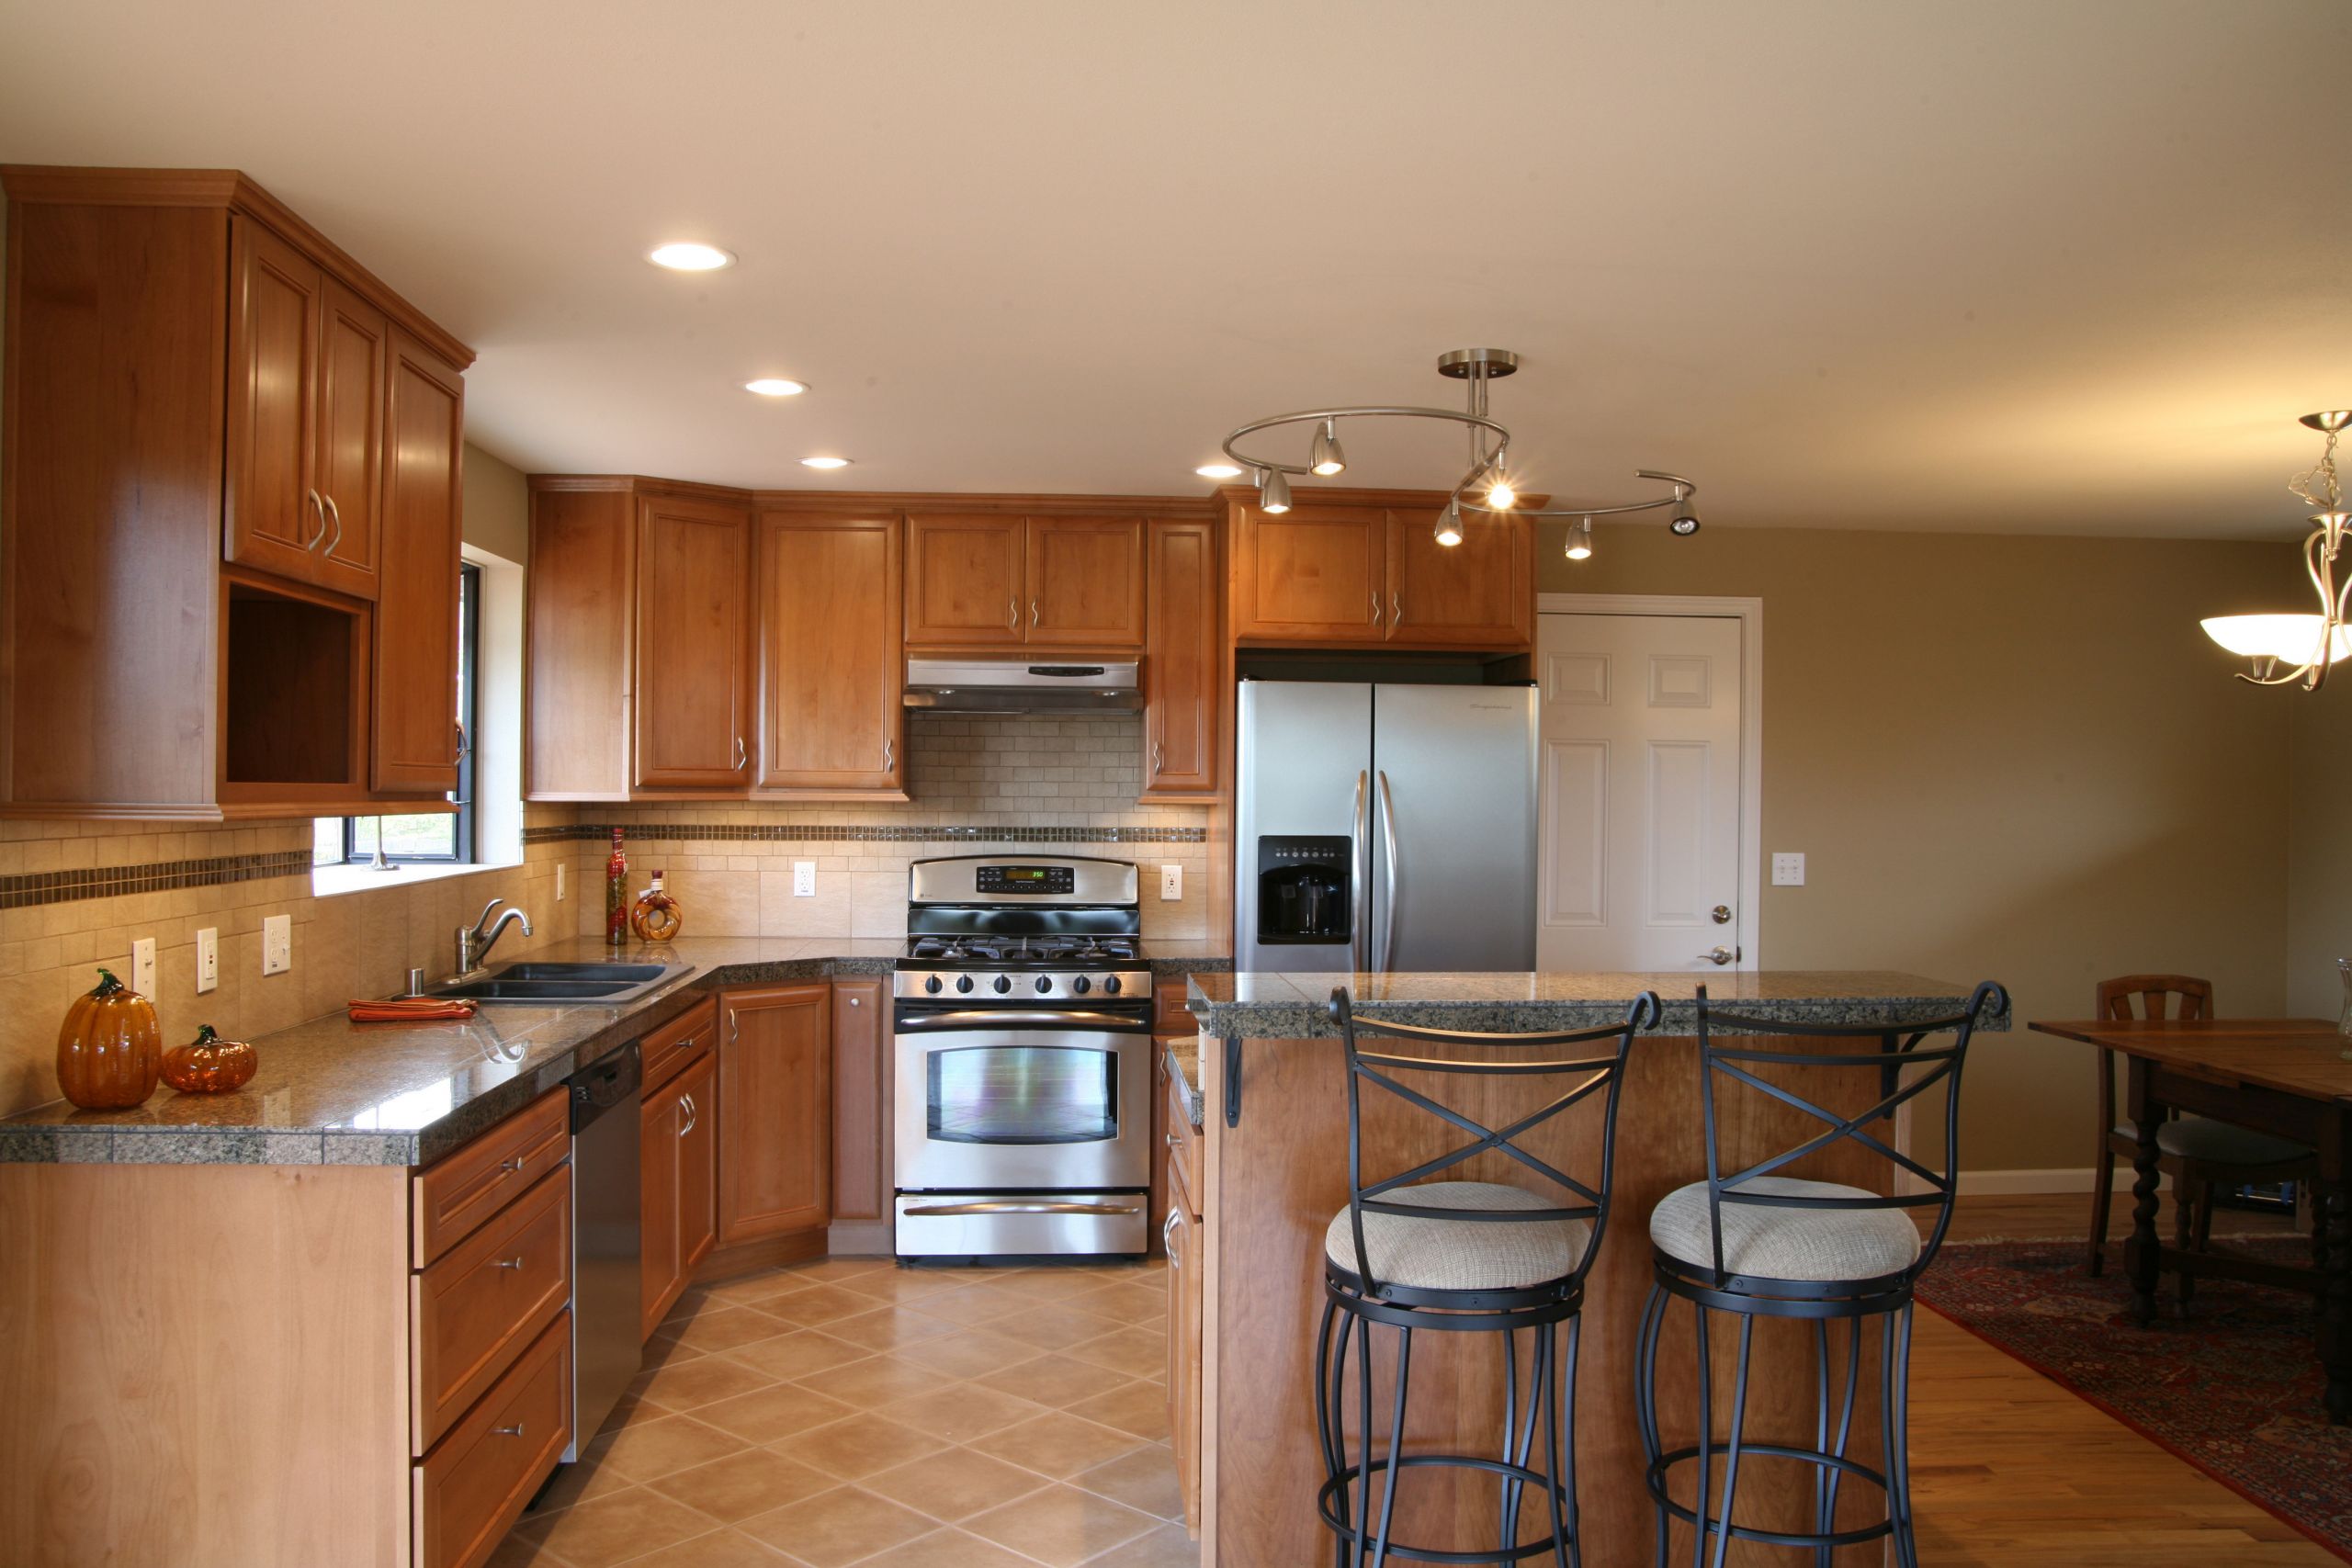 Kitchen Remodel Pic
 Add value to your home with Upscale Kitchen Remodeling